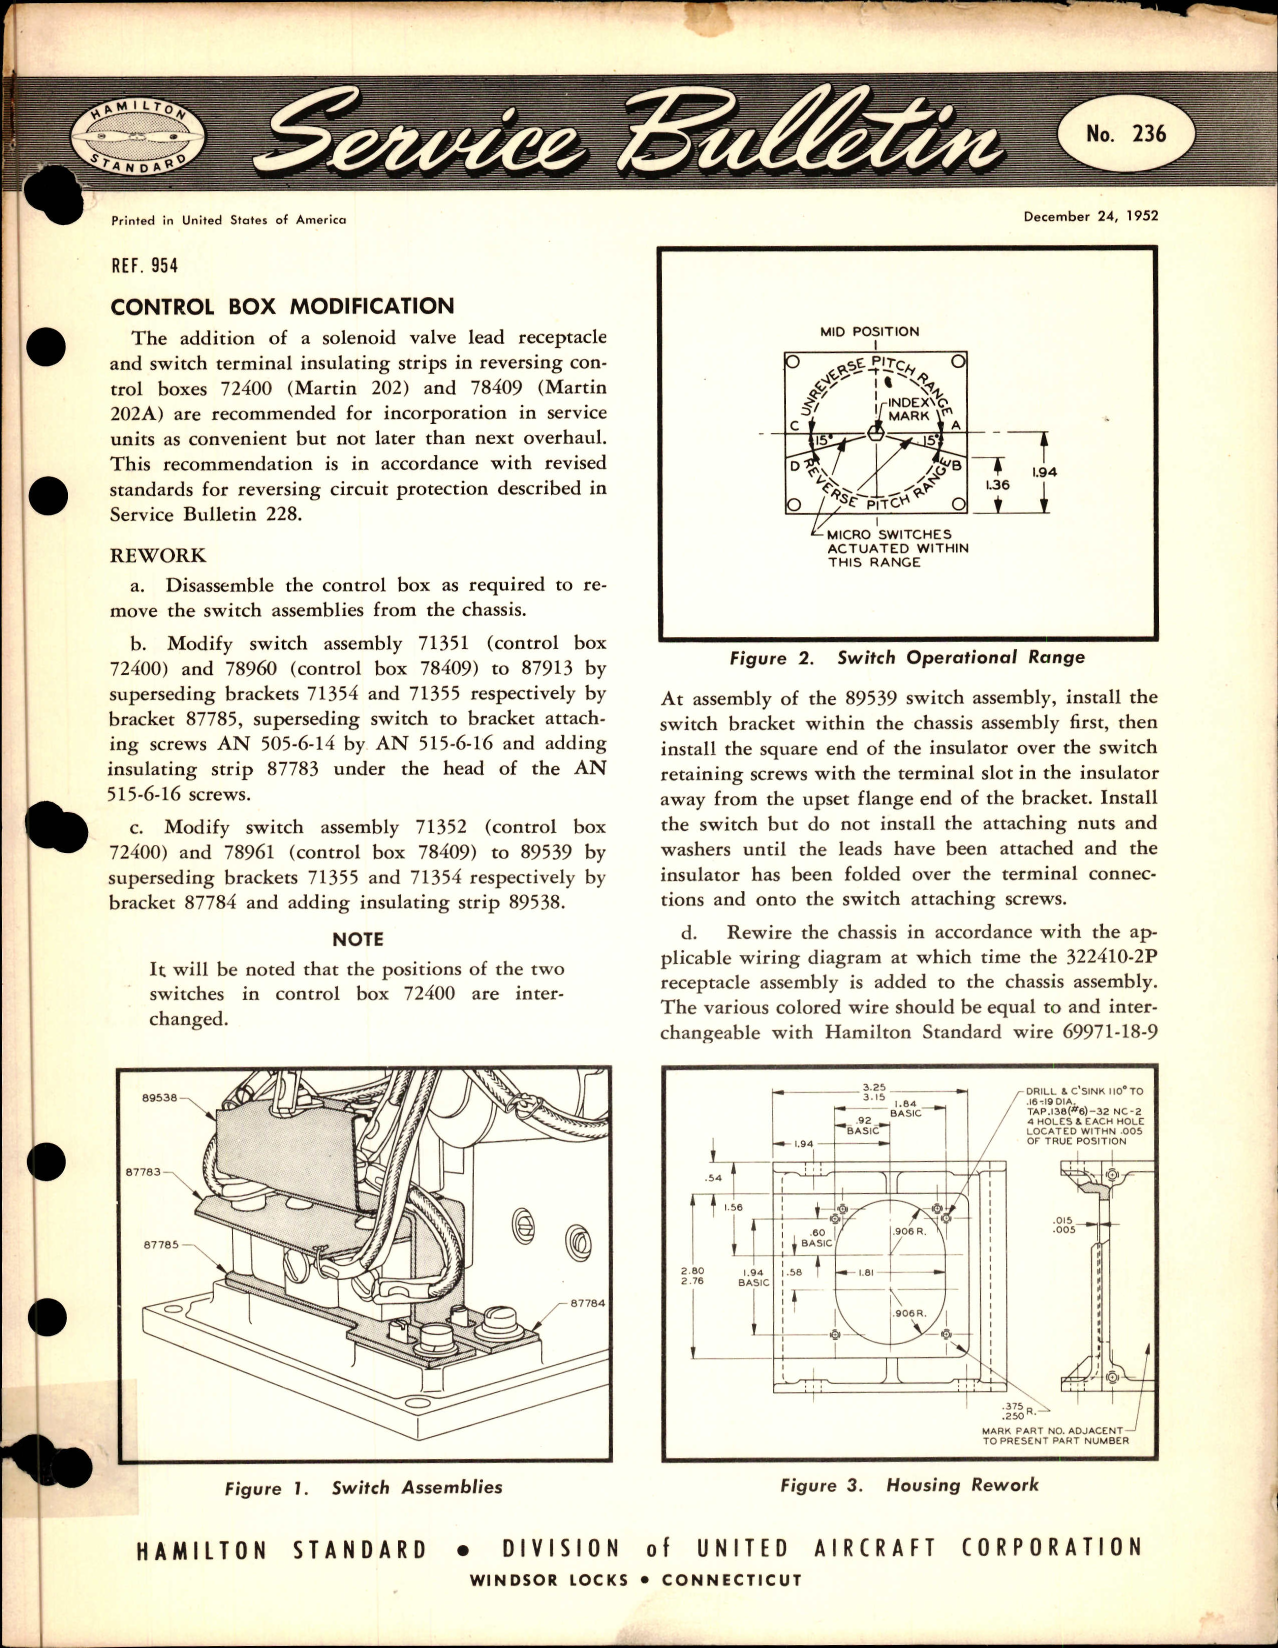 Sample page 1 from AirCorps Library document: Control Box Modification, Ref 954